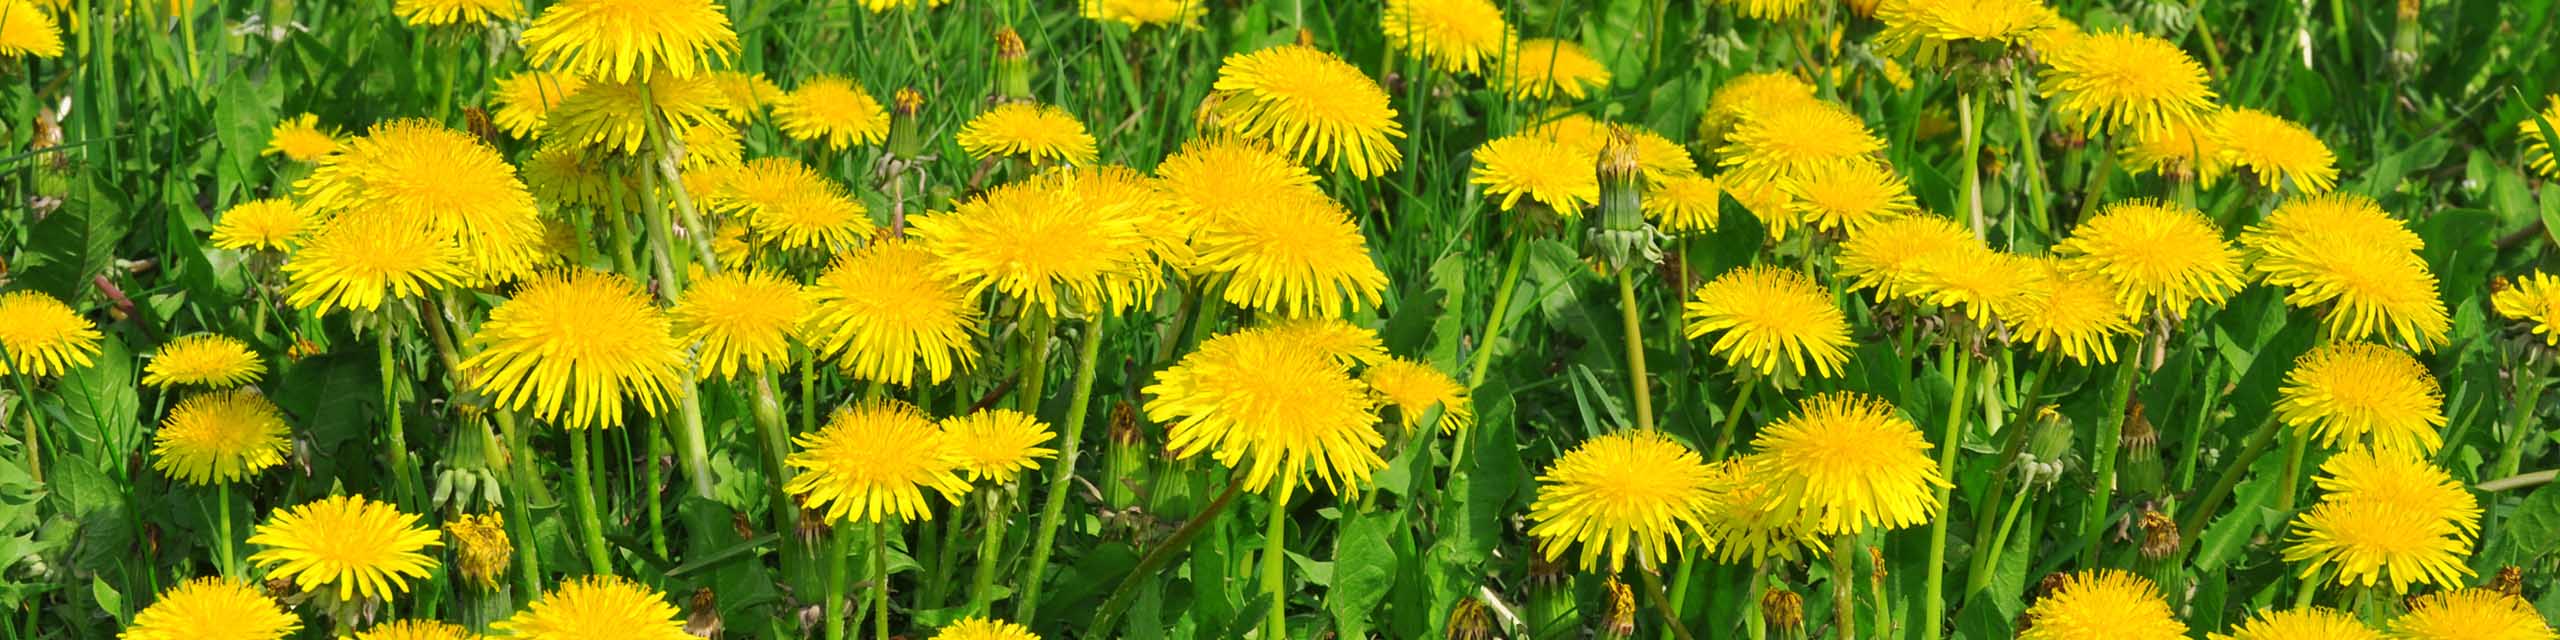 Close up of dandelions with yellow flowers in a meadow.